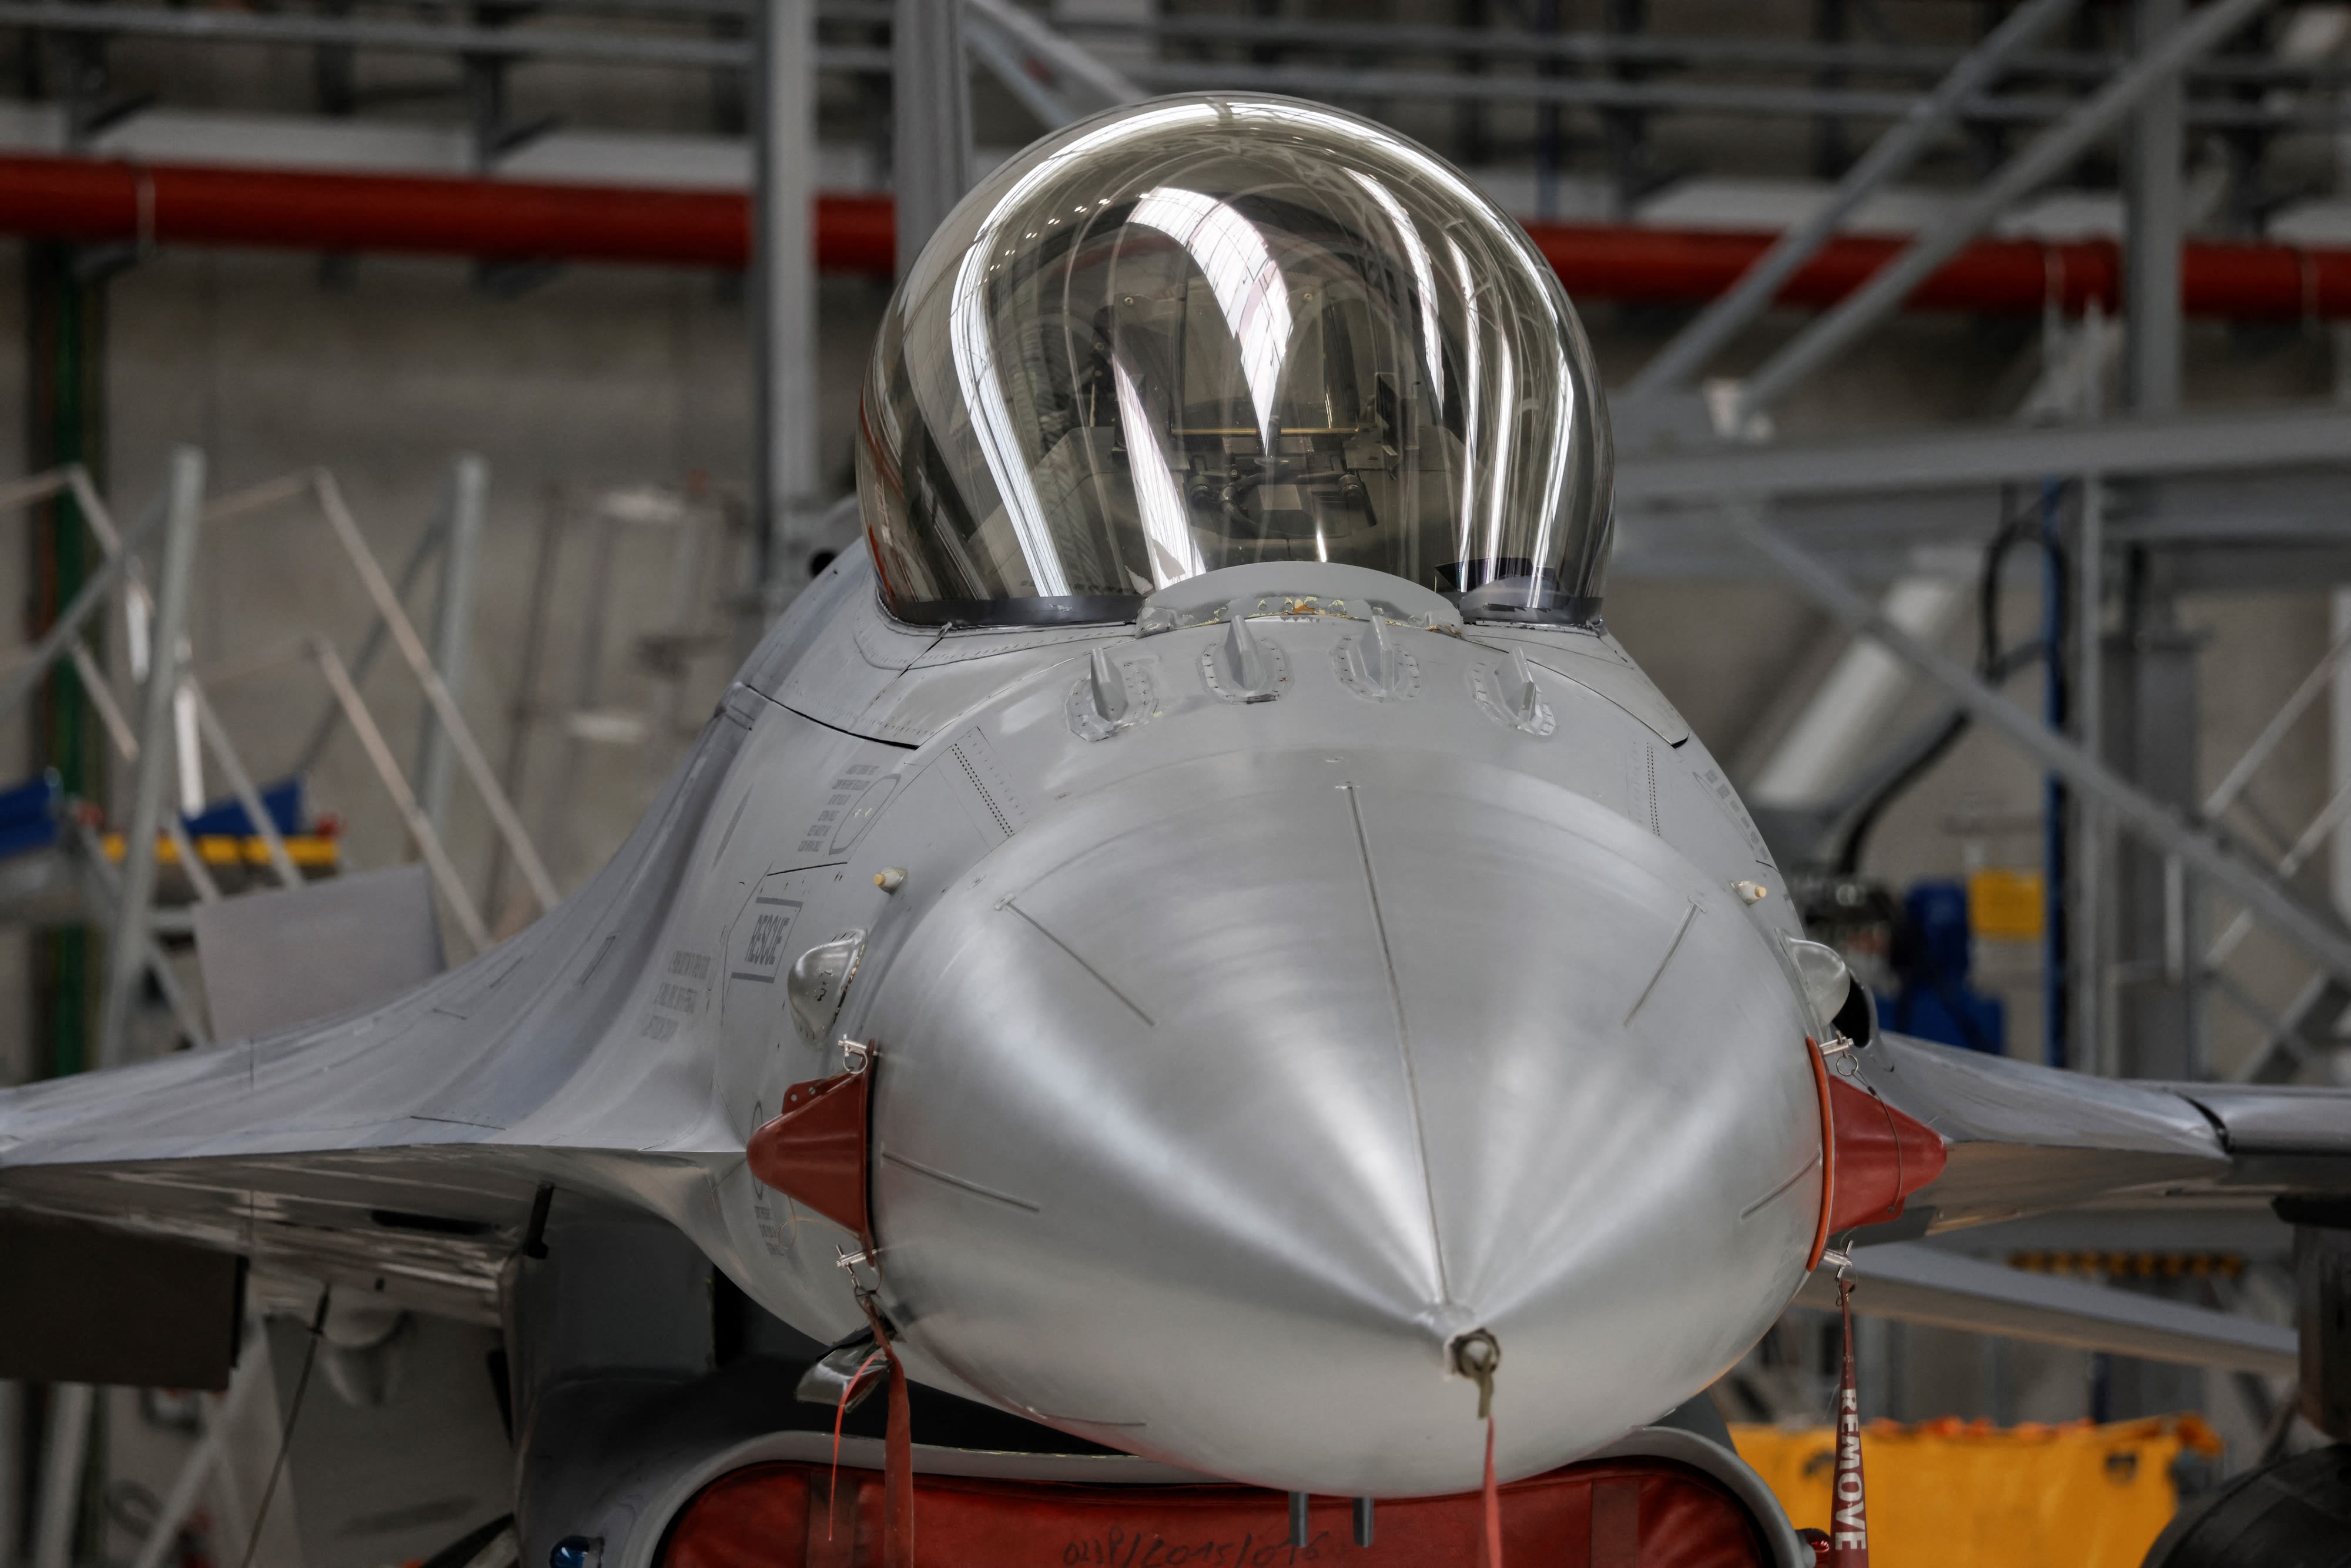 F-16 fighter jets arrive in Ukraine but may not tip advantage against Russia